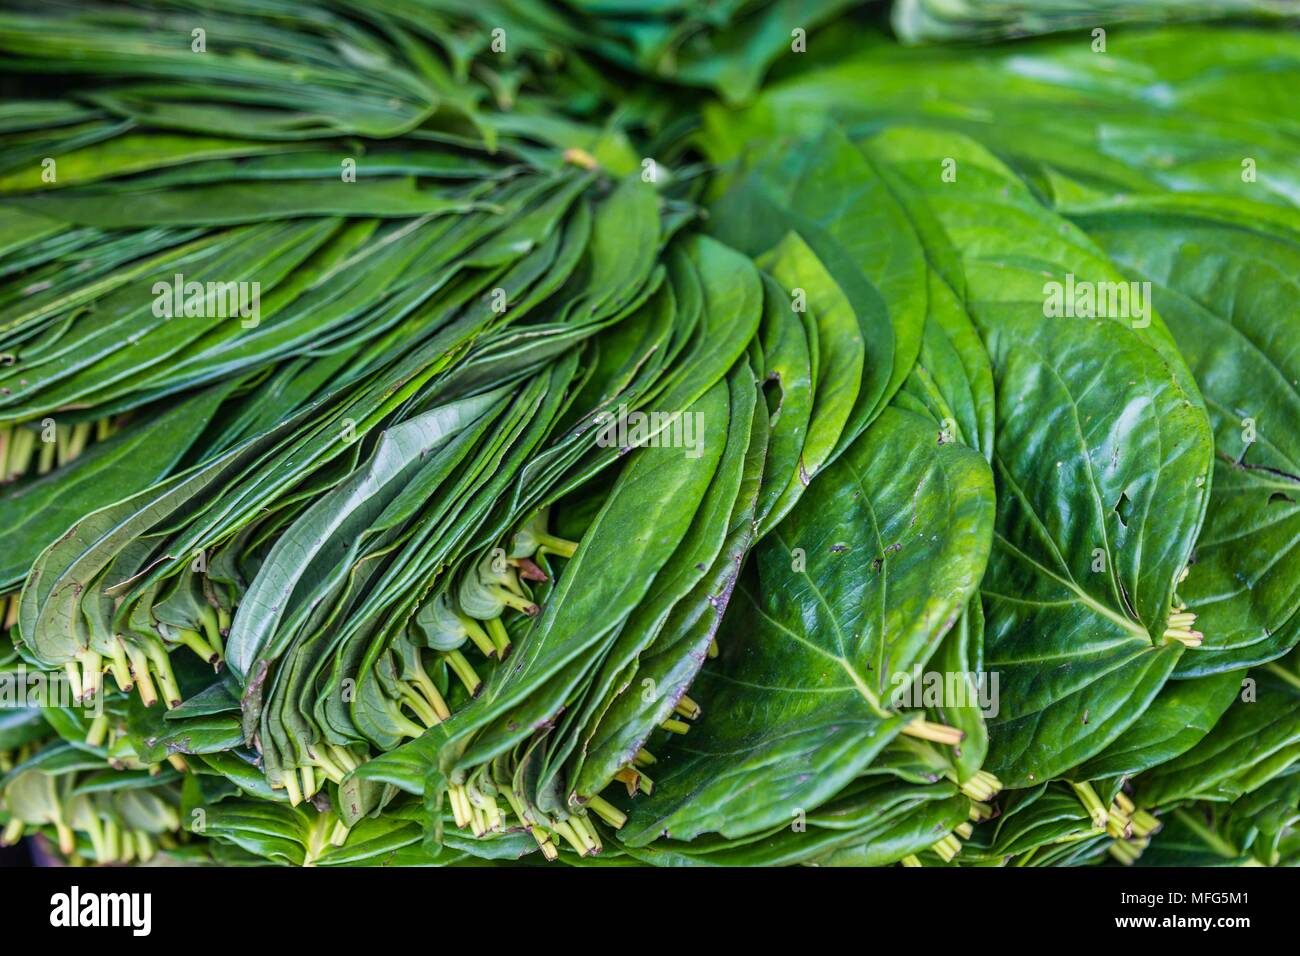 Background with sheaf or green betel leafs Stock Photo